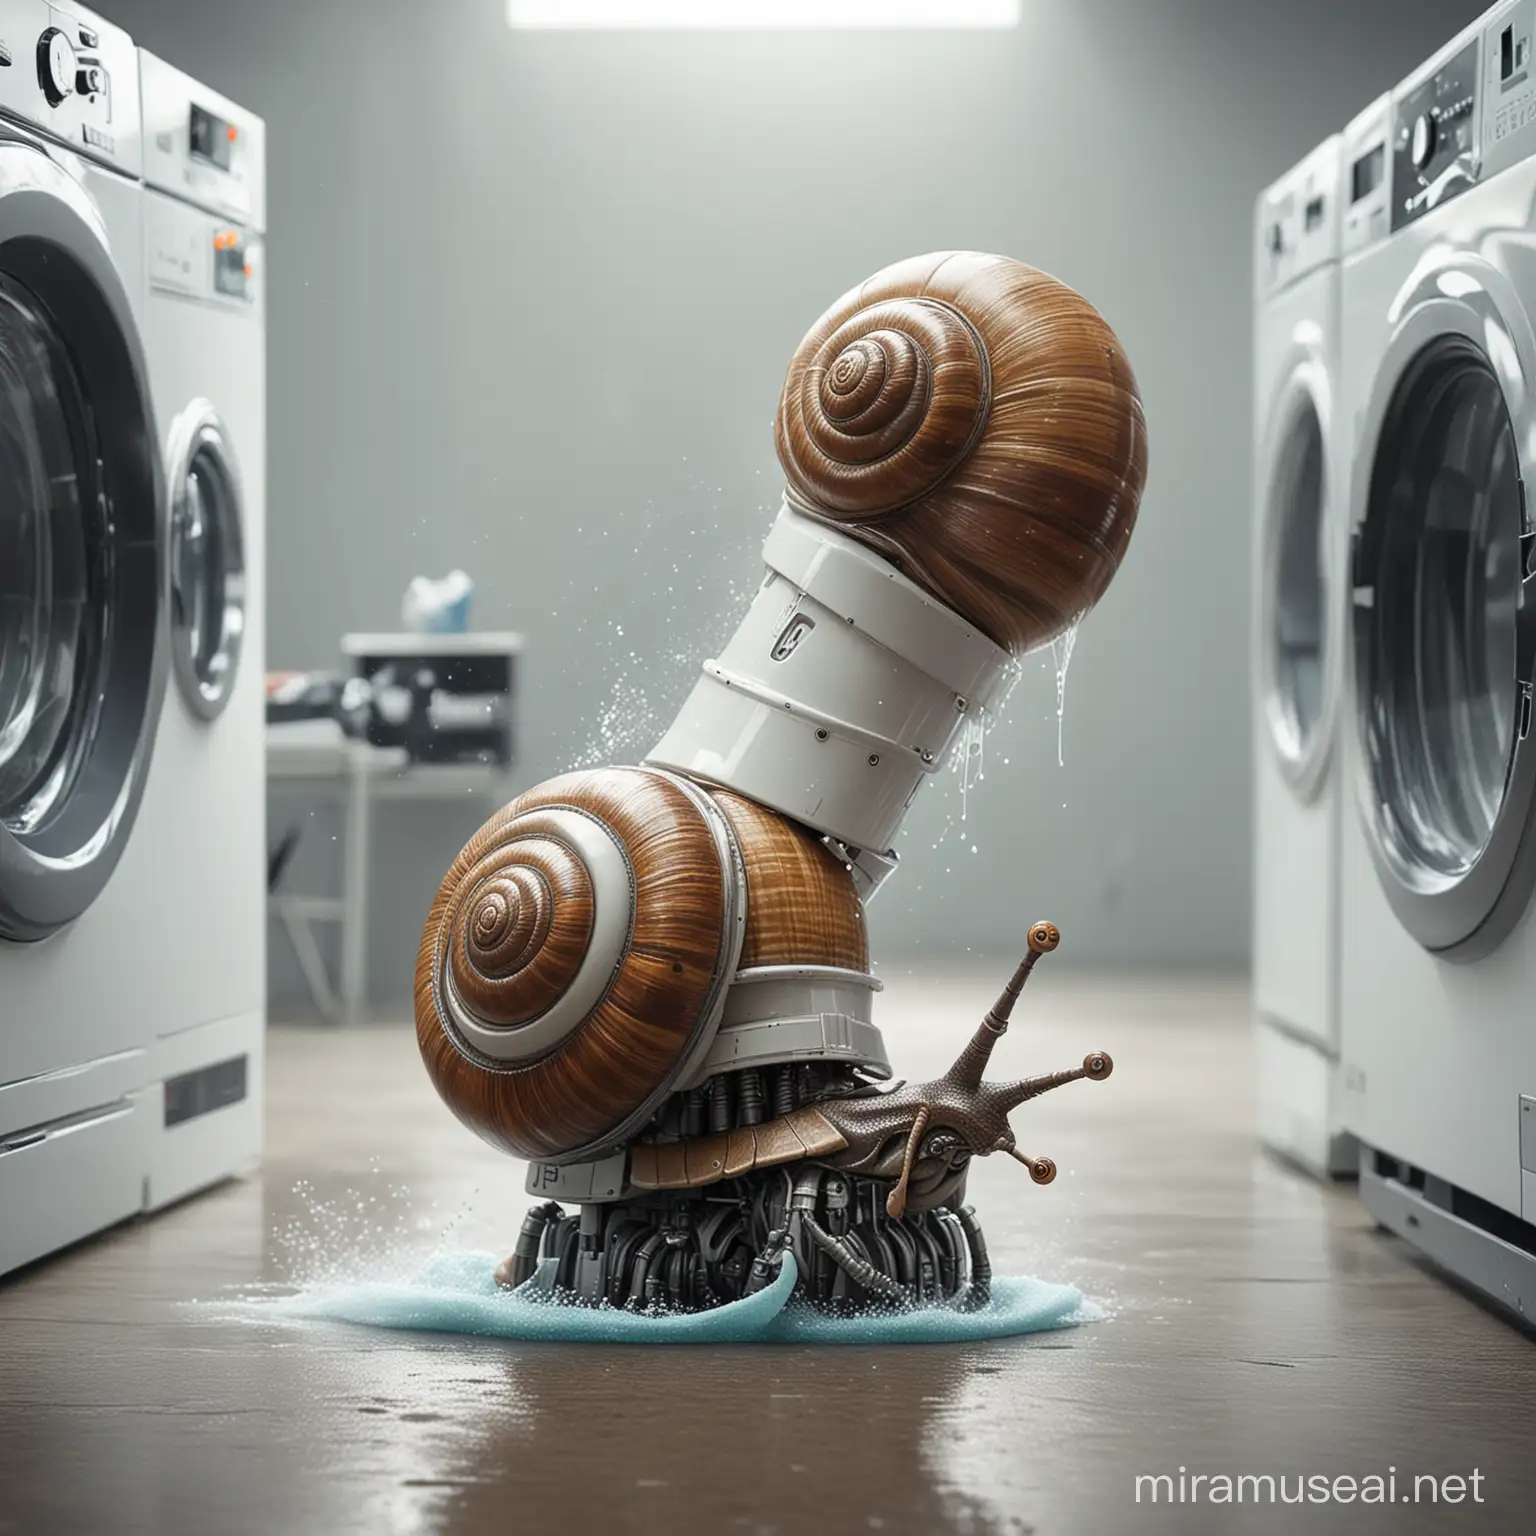 a robot snail with as funnel head running a laundry cleaning shop